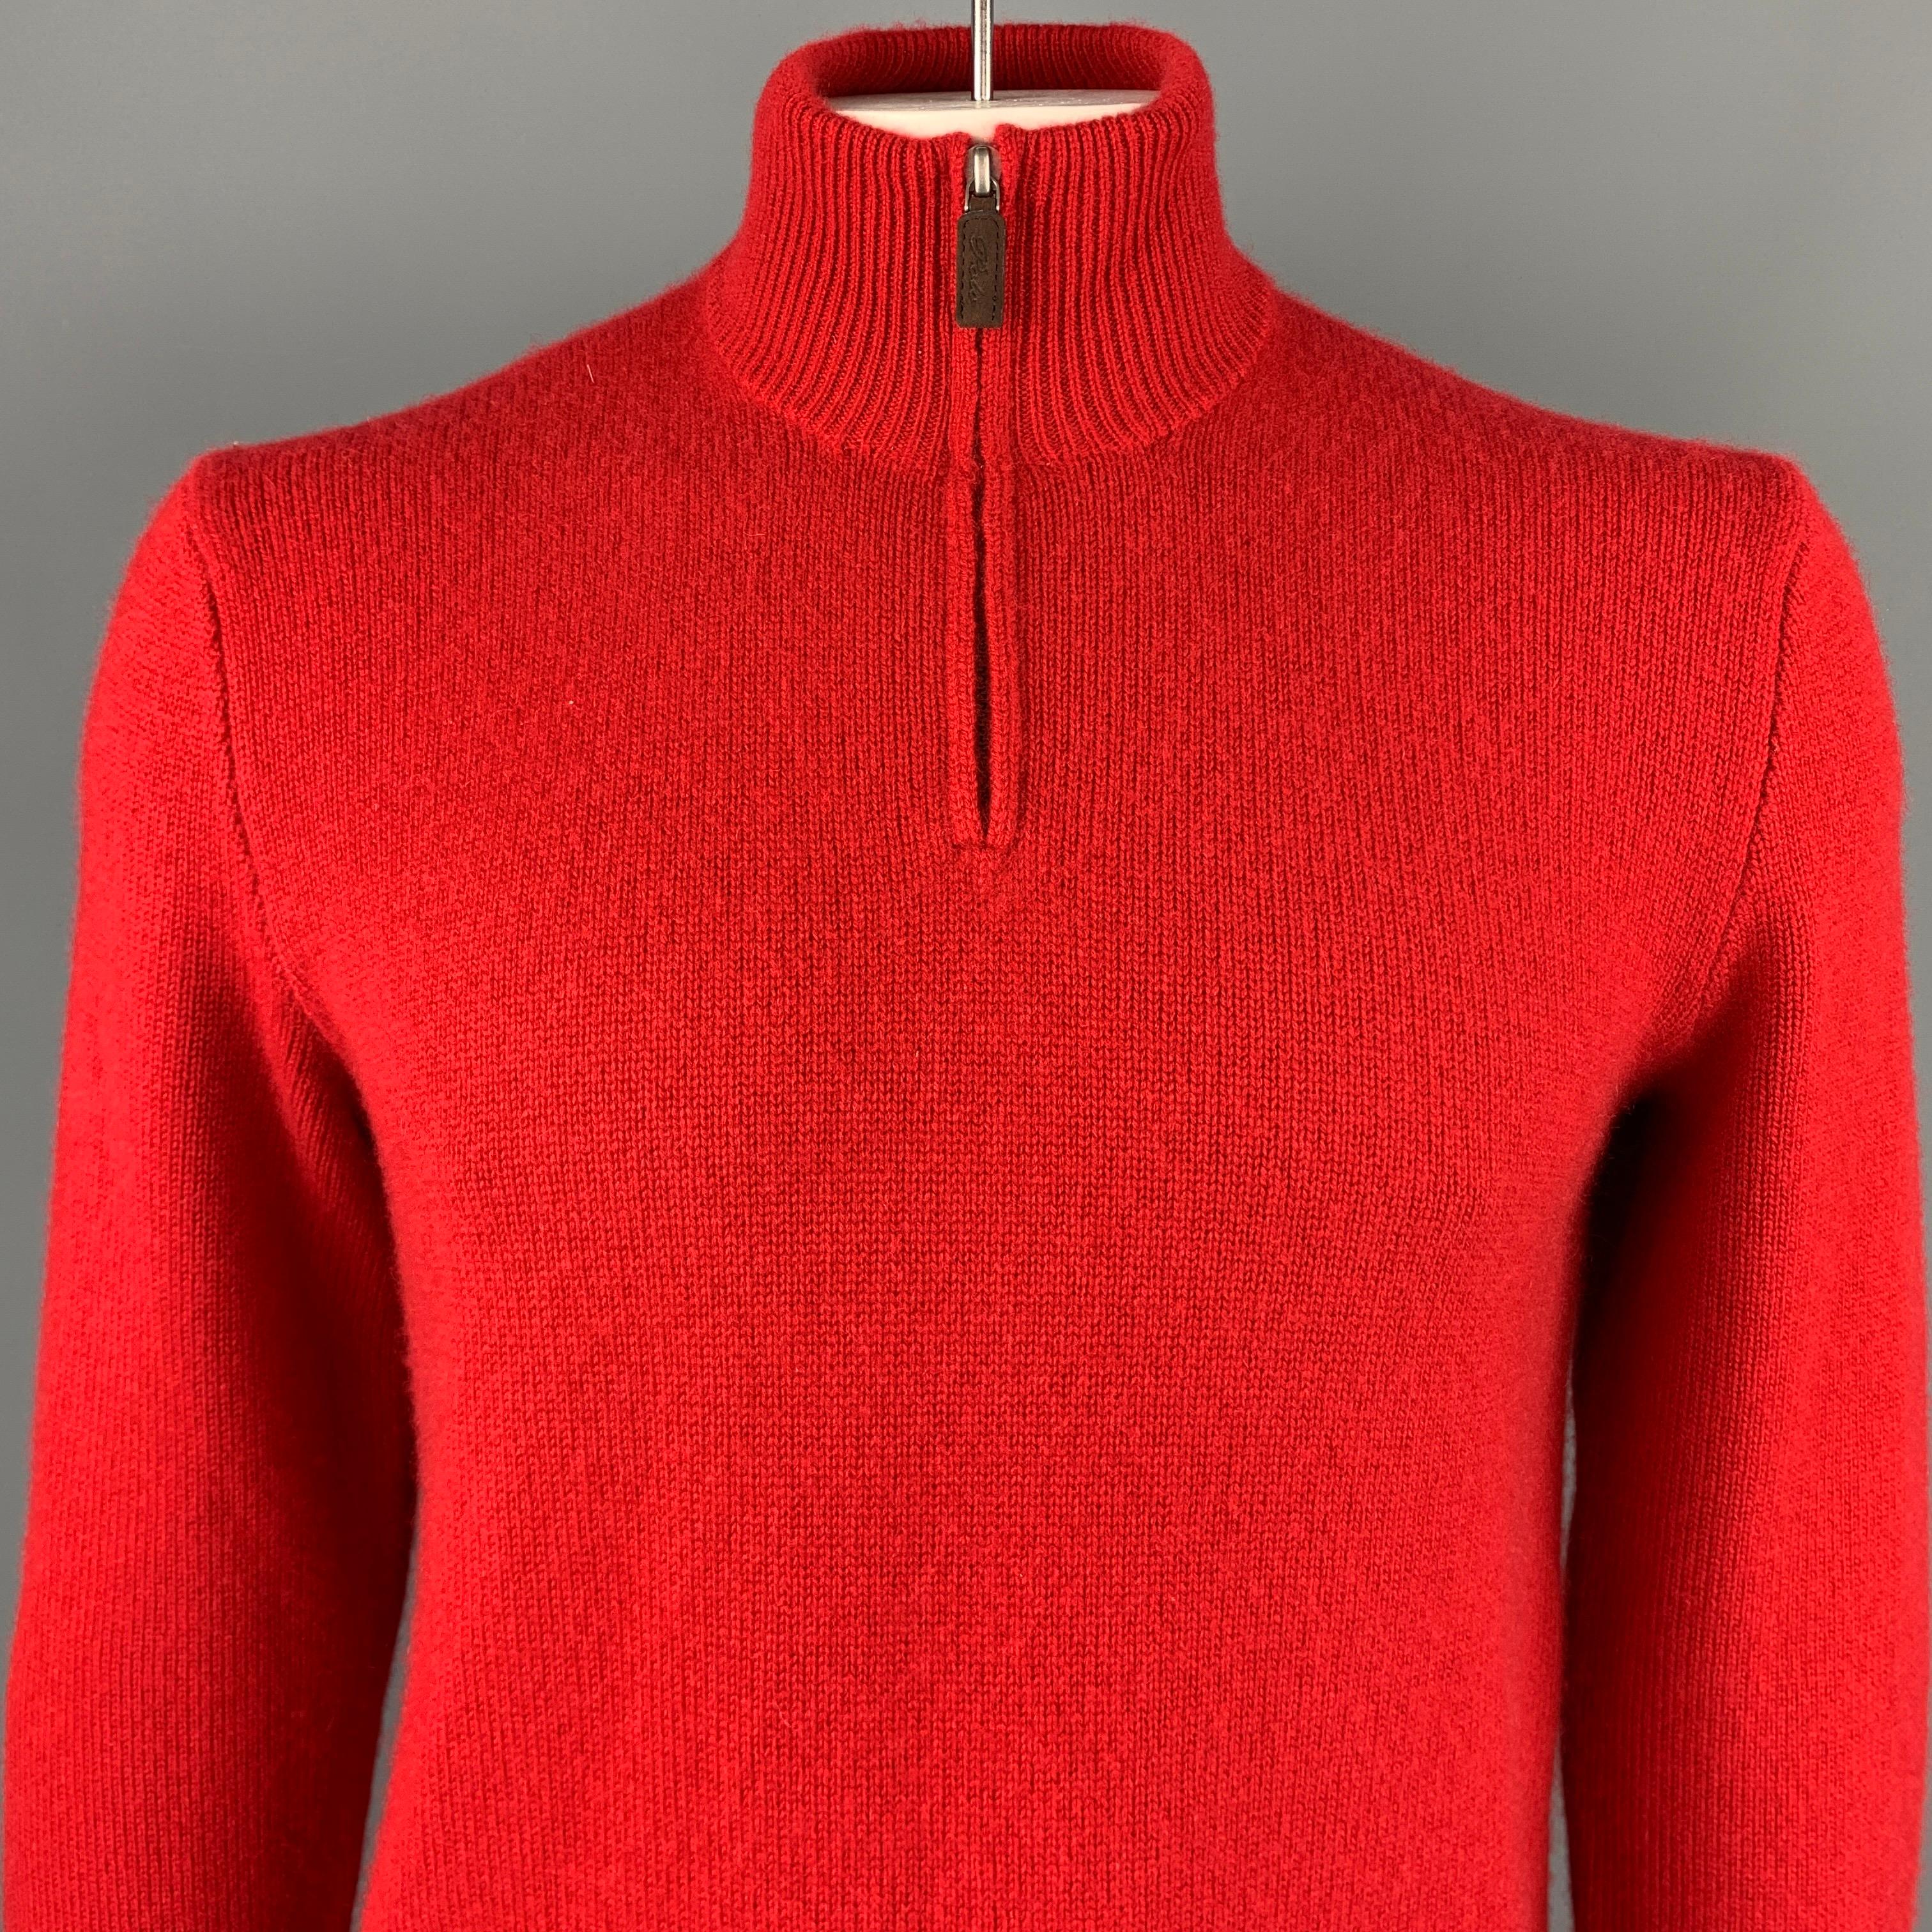 RALPH LAUREN pullover comes in a red knitted cashmere featuring a high collar and a half zip closure.

Excellent Pre-Owned Condition.
Marked: L

Measurements:

Shoulder: 18.5 in. 
Chest: 42 in. 
Sleeve: 27.5 in. 
Length: 26 in. 